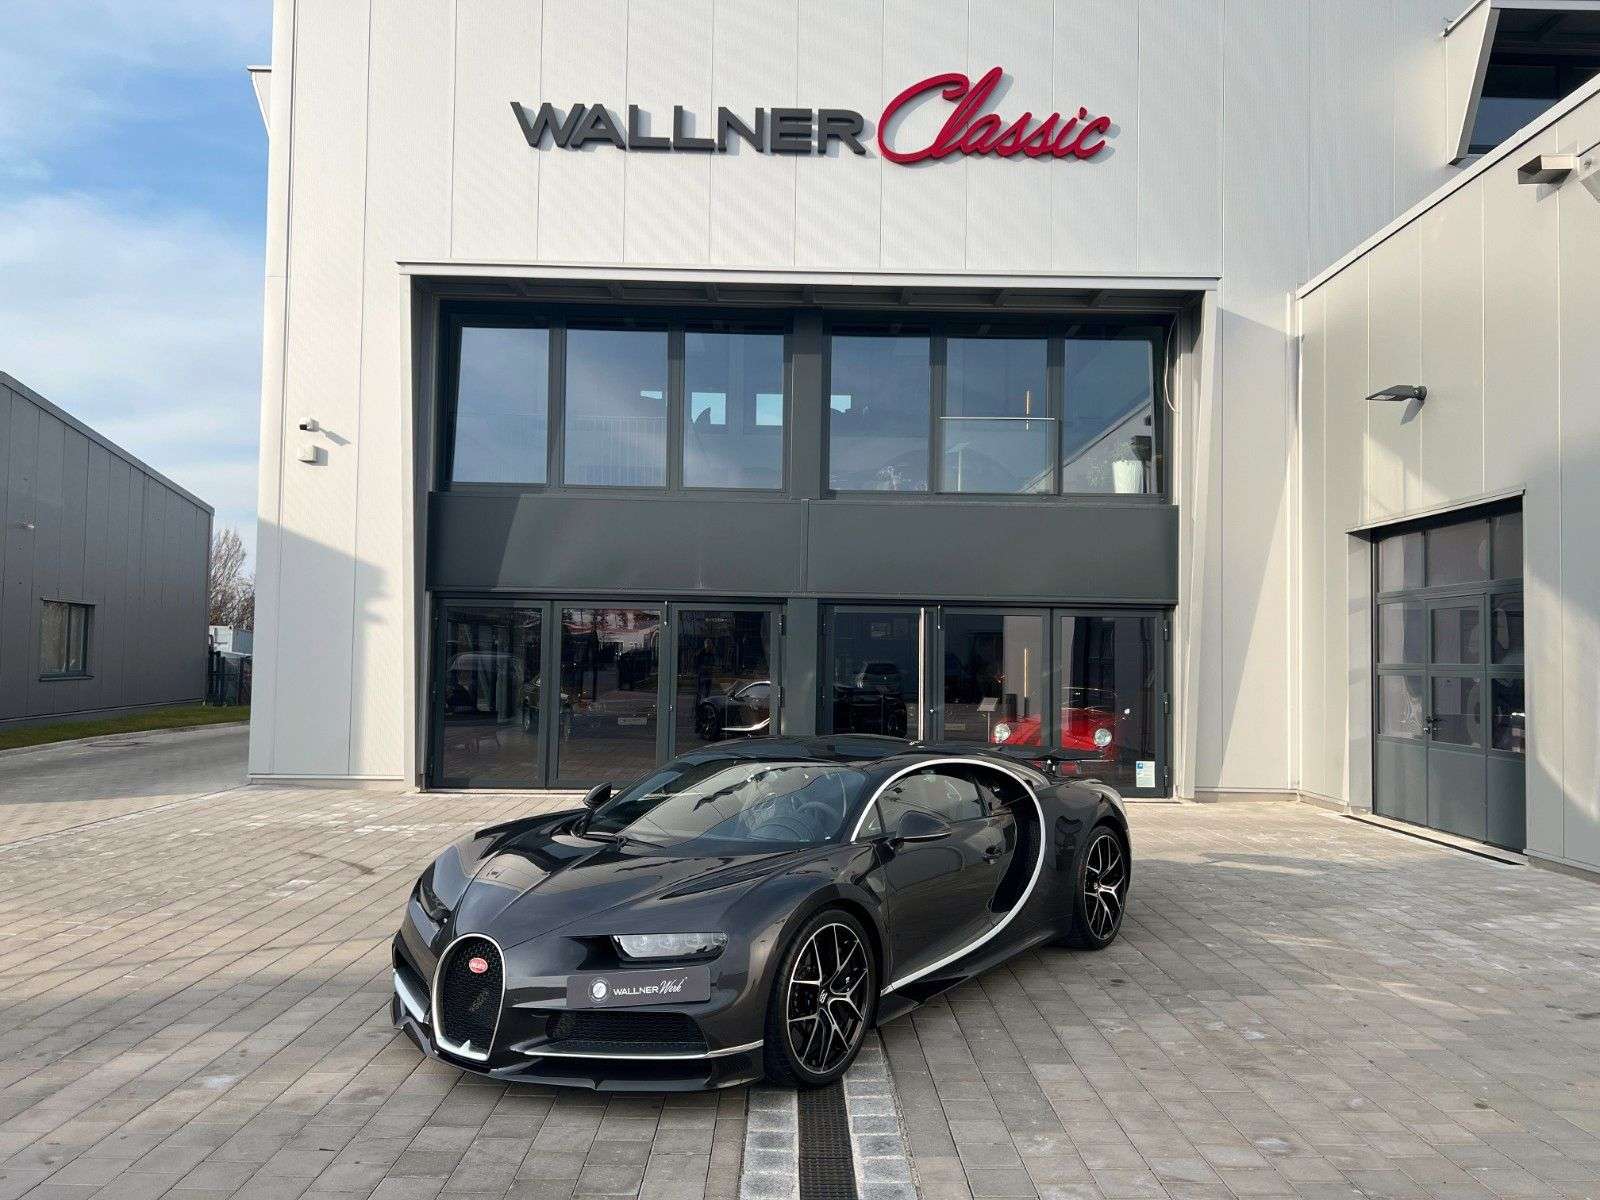 Bugatti Chiron Coupe in Green used in Anzing for € 4,998,000.-